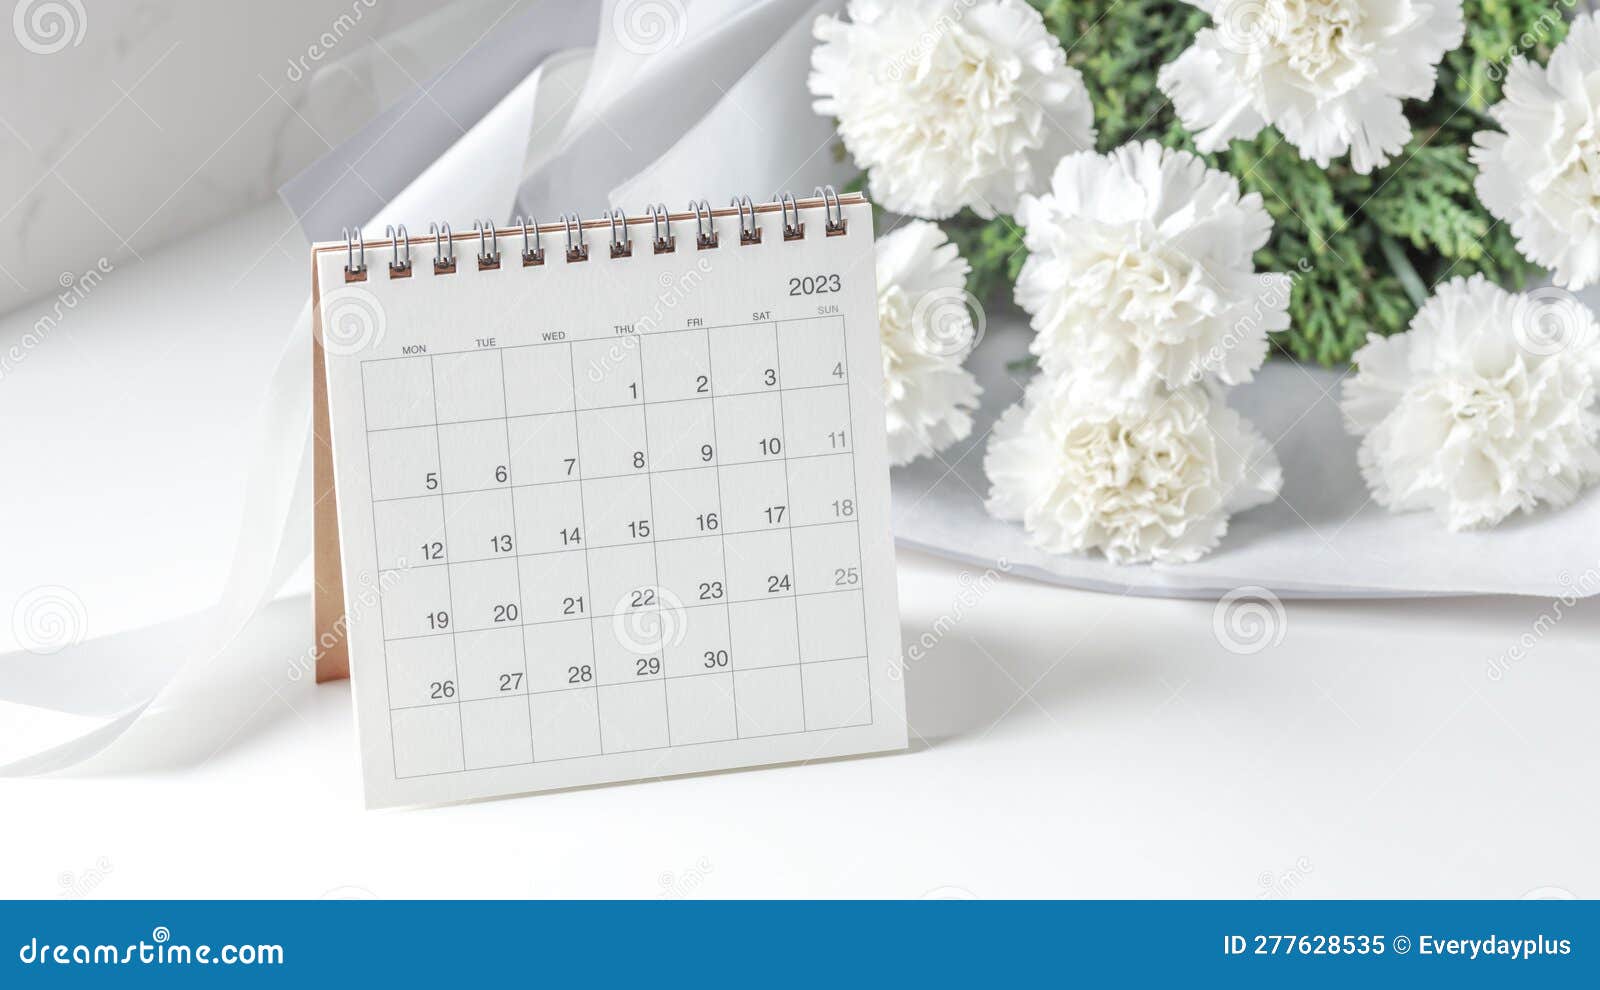 calendar 2023 with flowers on white table